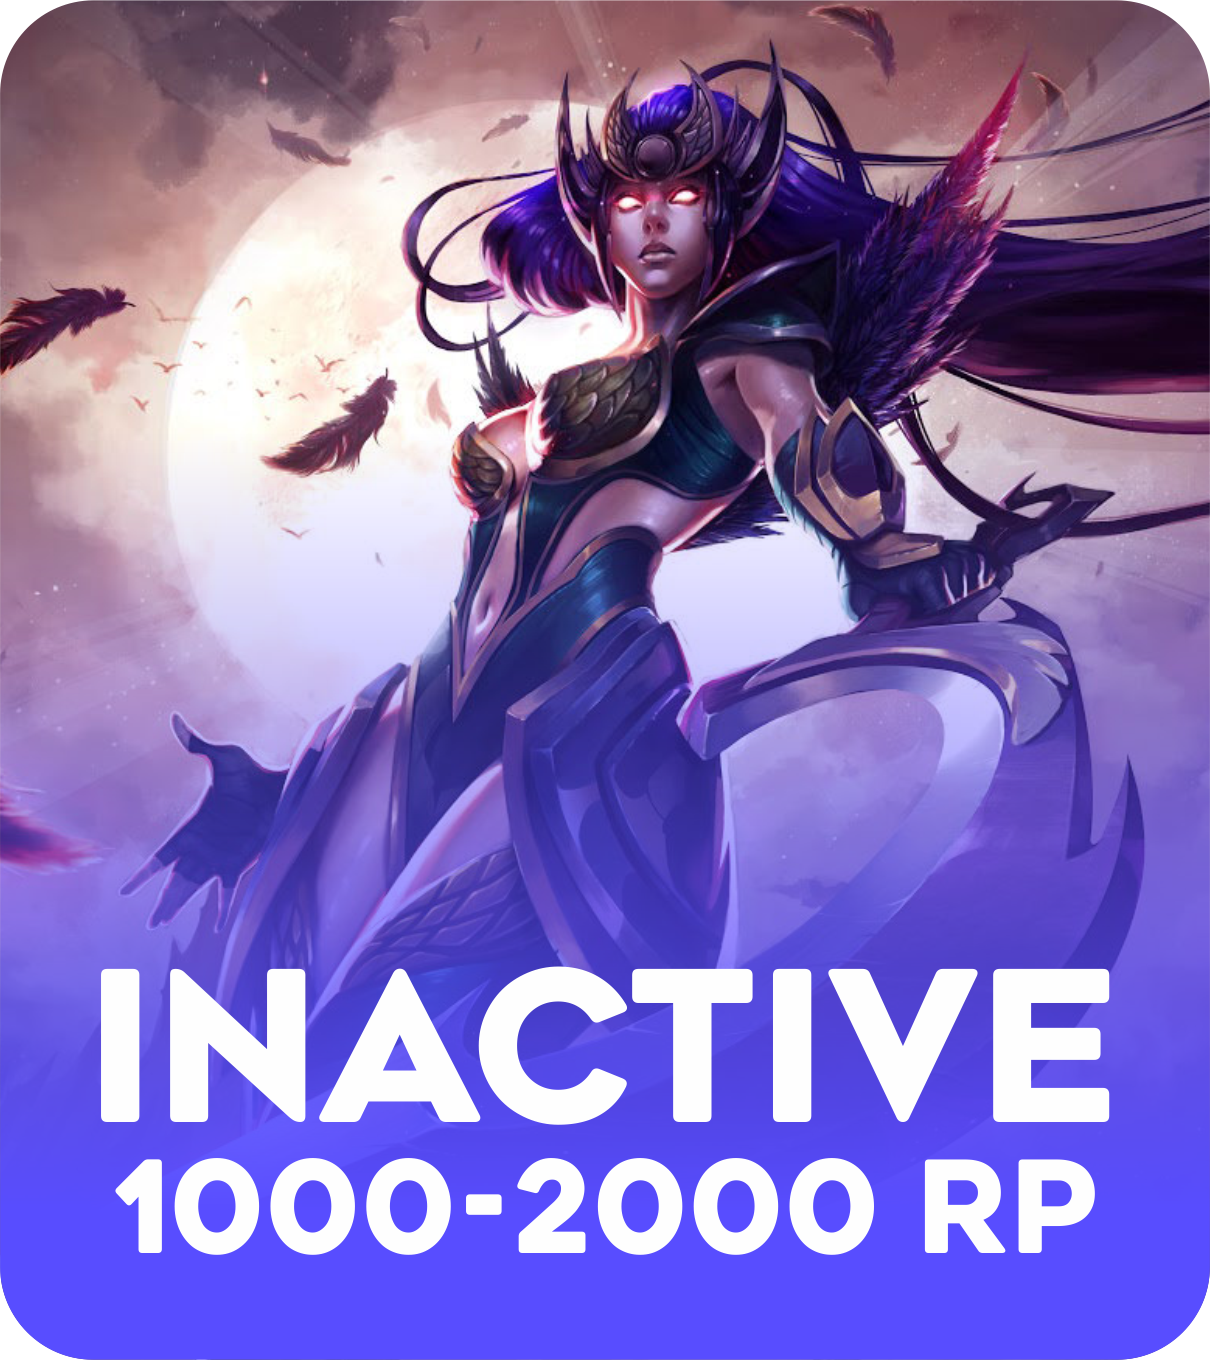 Inactive 1000-2000 RP Account